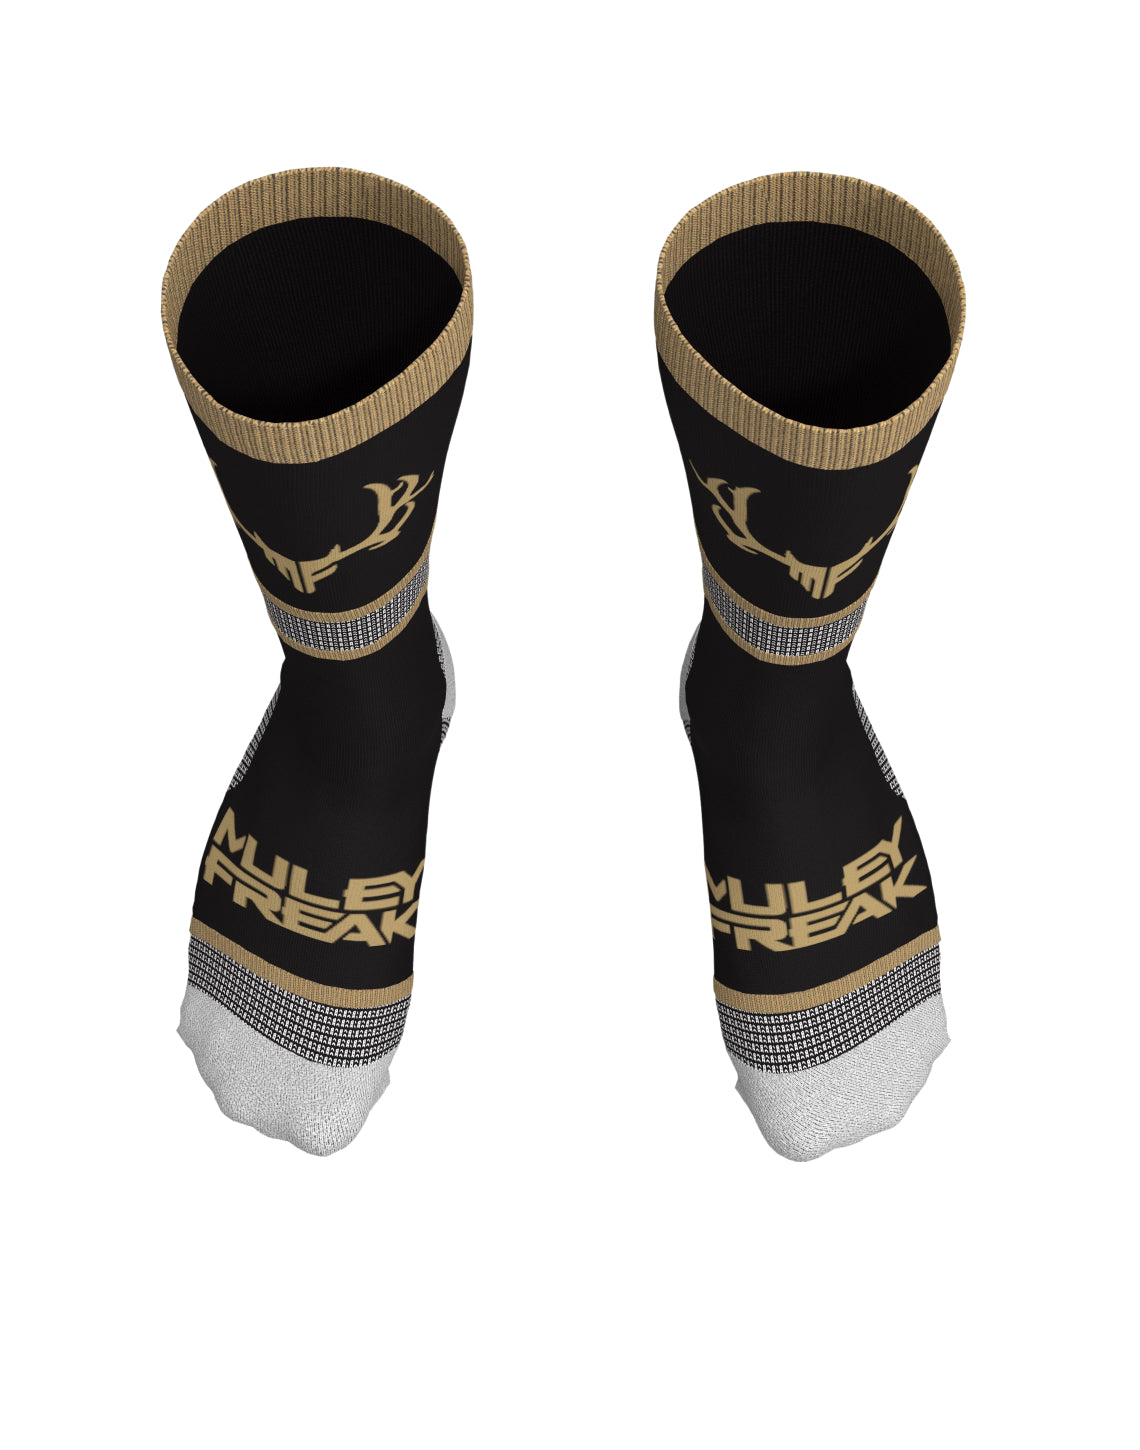 Close-up of Muley Freak Elite Merino Socks' breathable fabric and anti-odor feature.